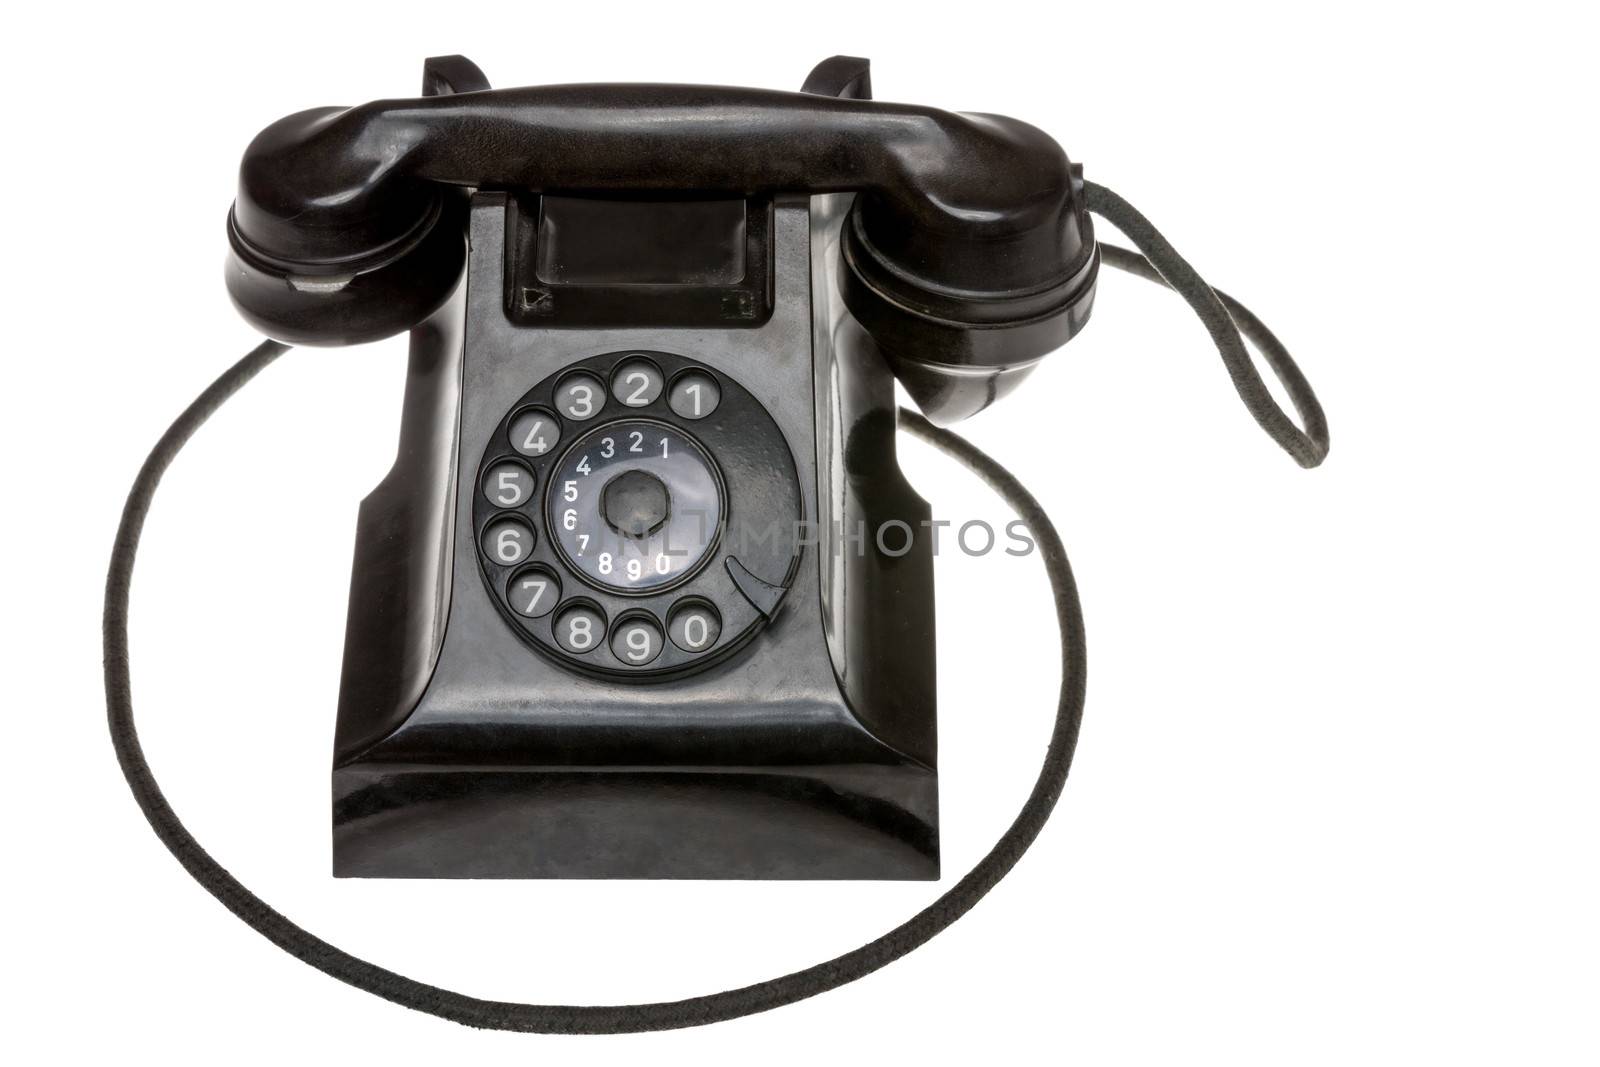 Classic old black rotary dial-up telephone instrument, closeup frontal view with the handset in place over a white studio background